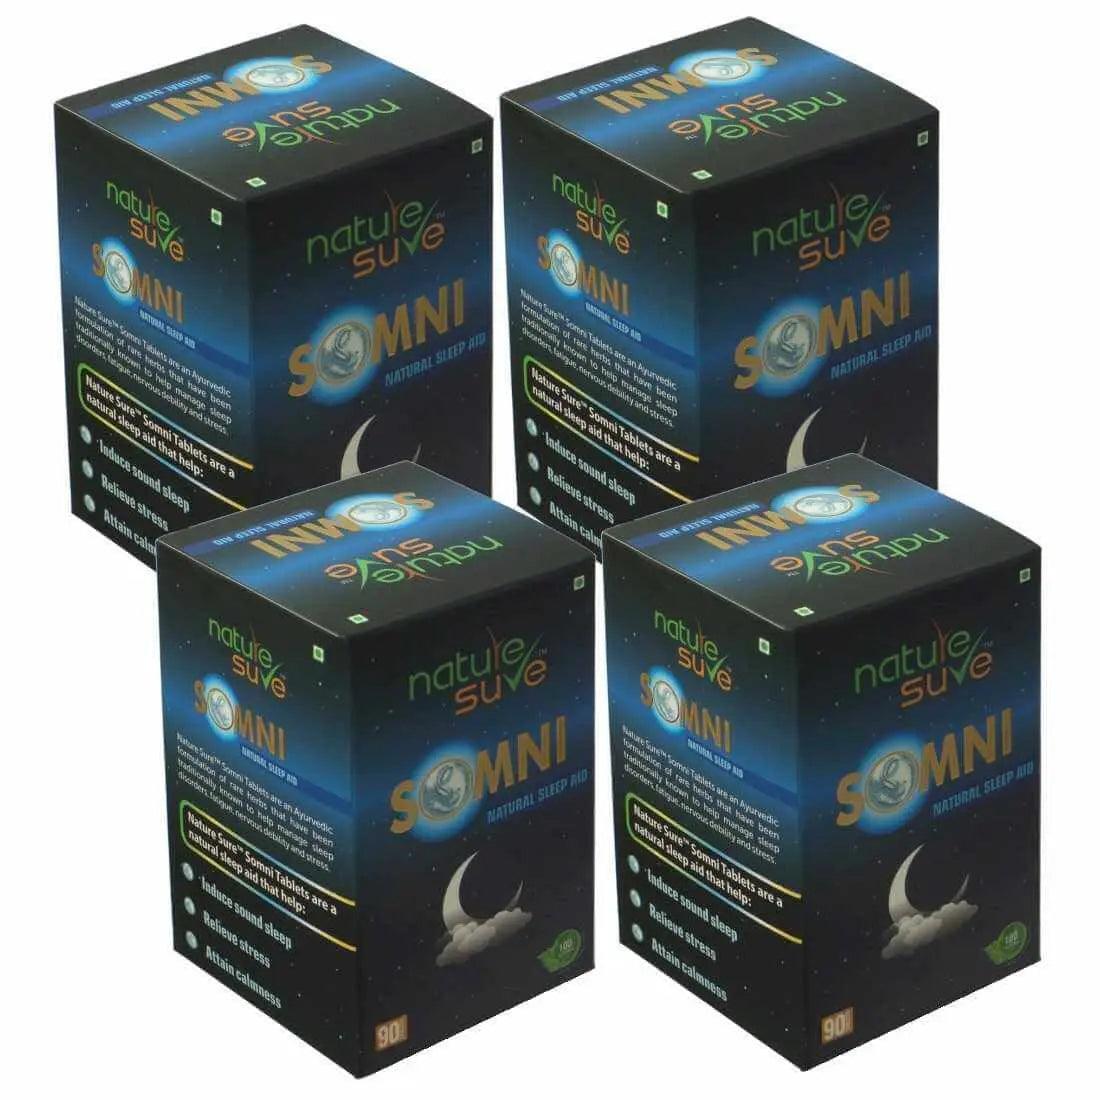 Nature Sure SOMNI Natural Sleep Aid Tablets for Men and Women - 90 Tablets 8903540010534